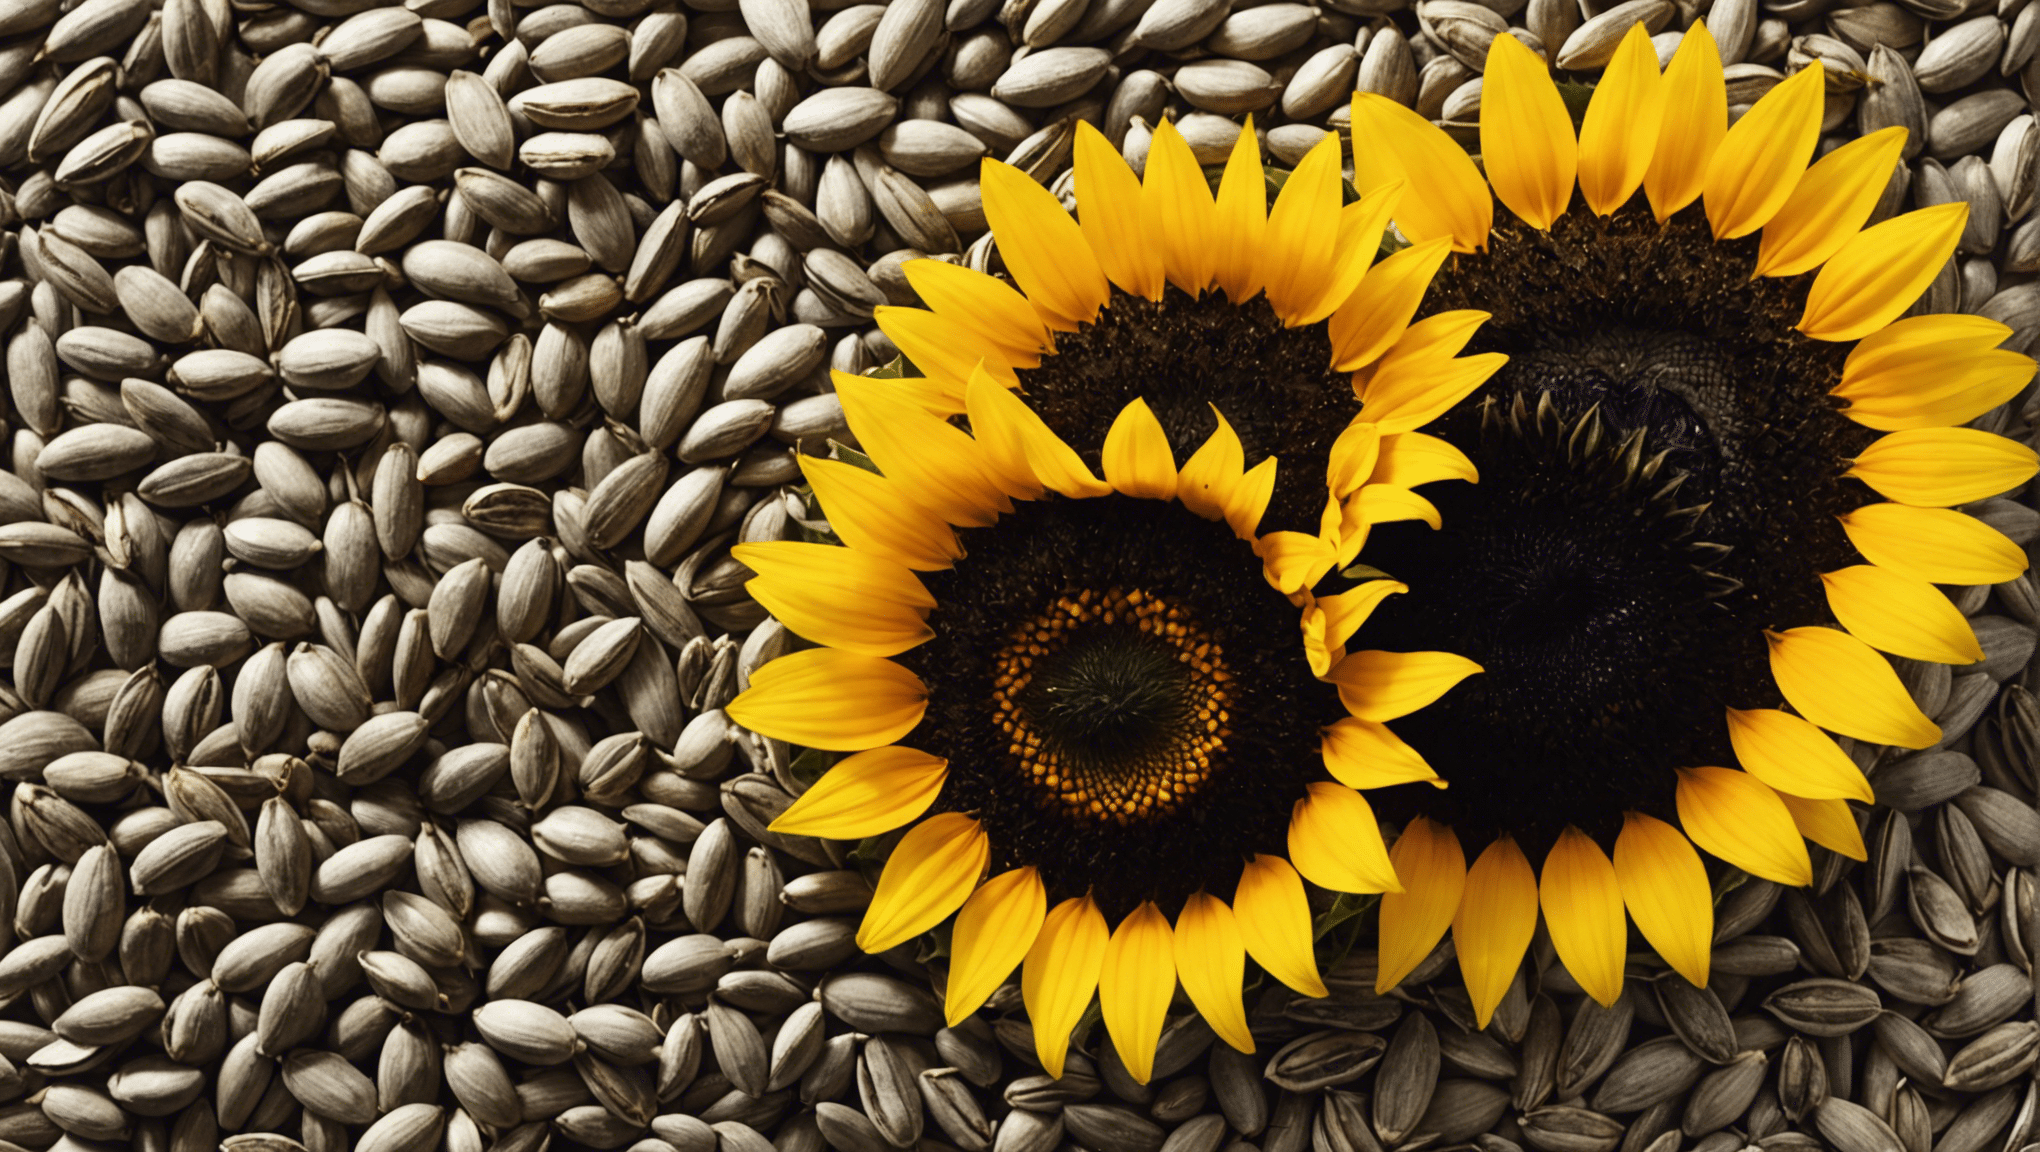 discover the latest trend in healthy eating with big sunflower seeds, the potential superfood craze of the future. find out why everyone is talking about the benefits of this nutrient-rich snack.